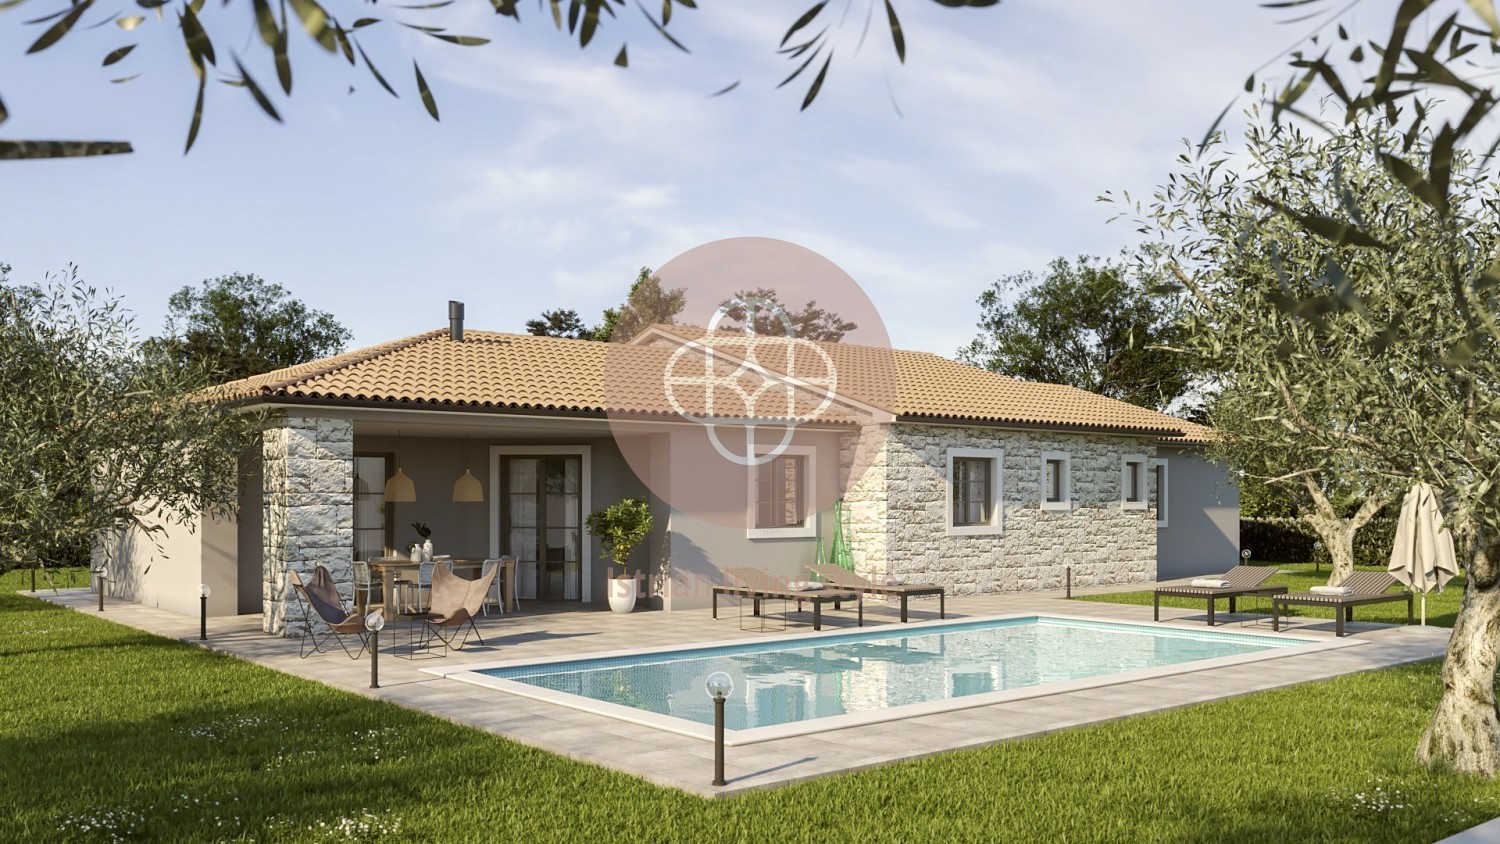 Luxurious bungalow with pool and large plot of land Accommodation in Labin